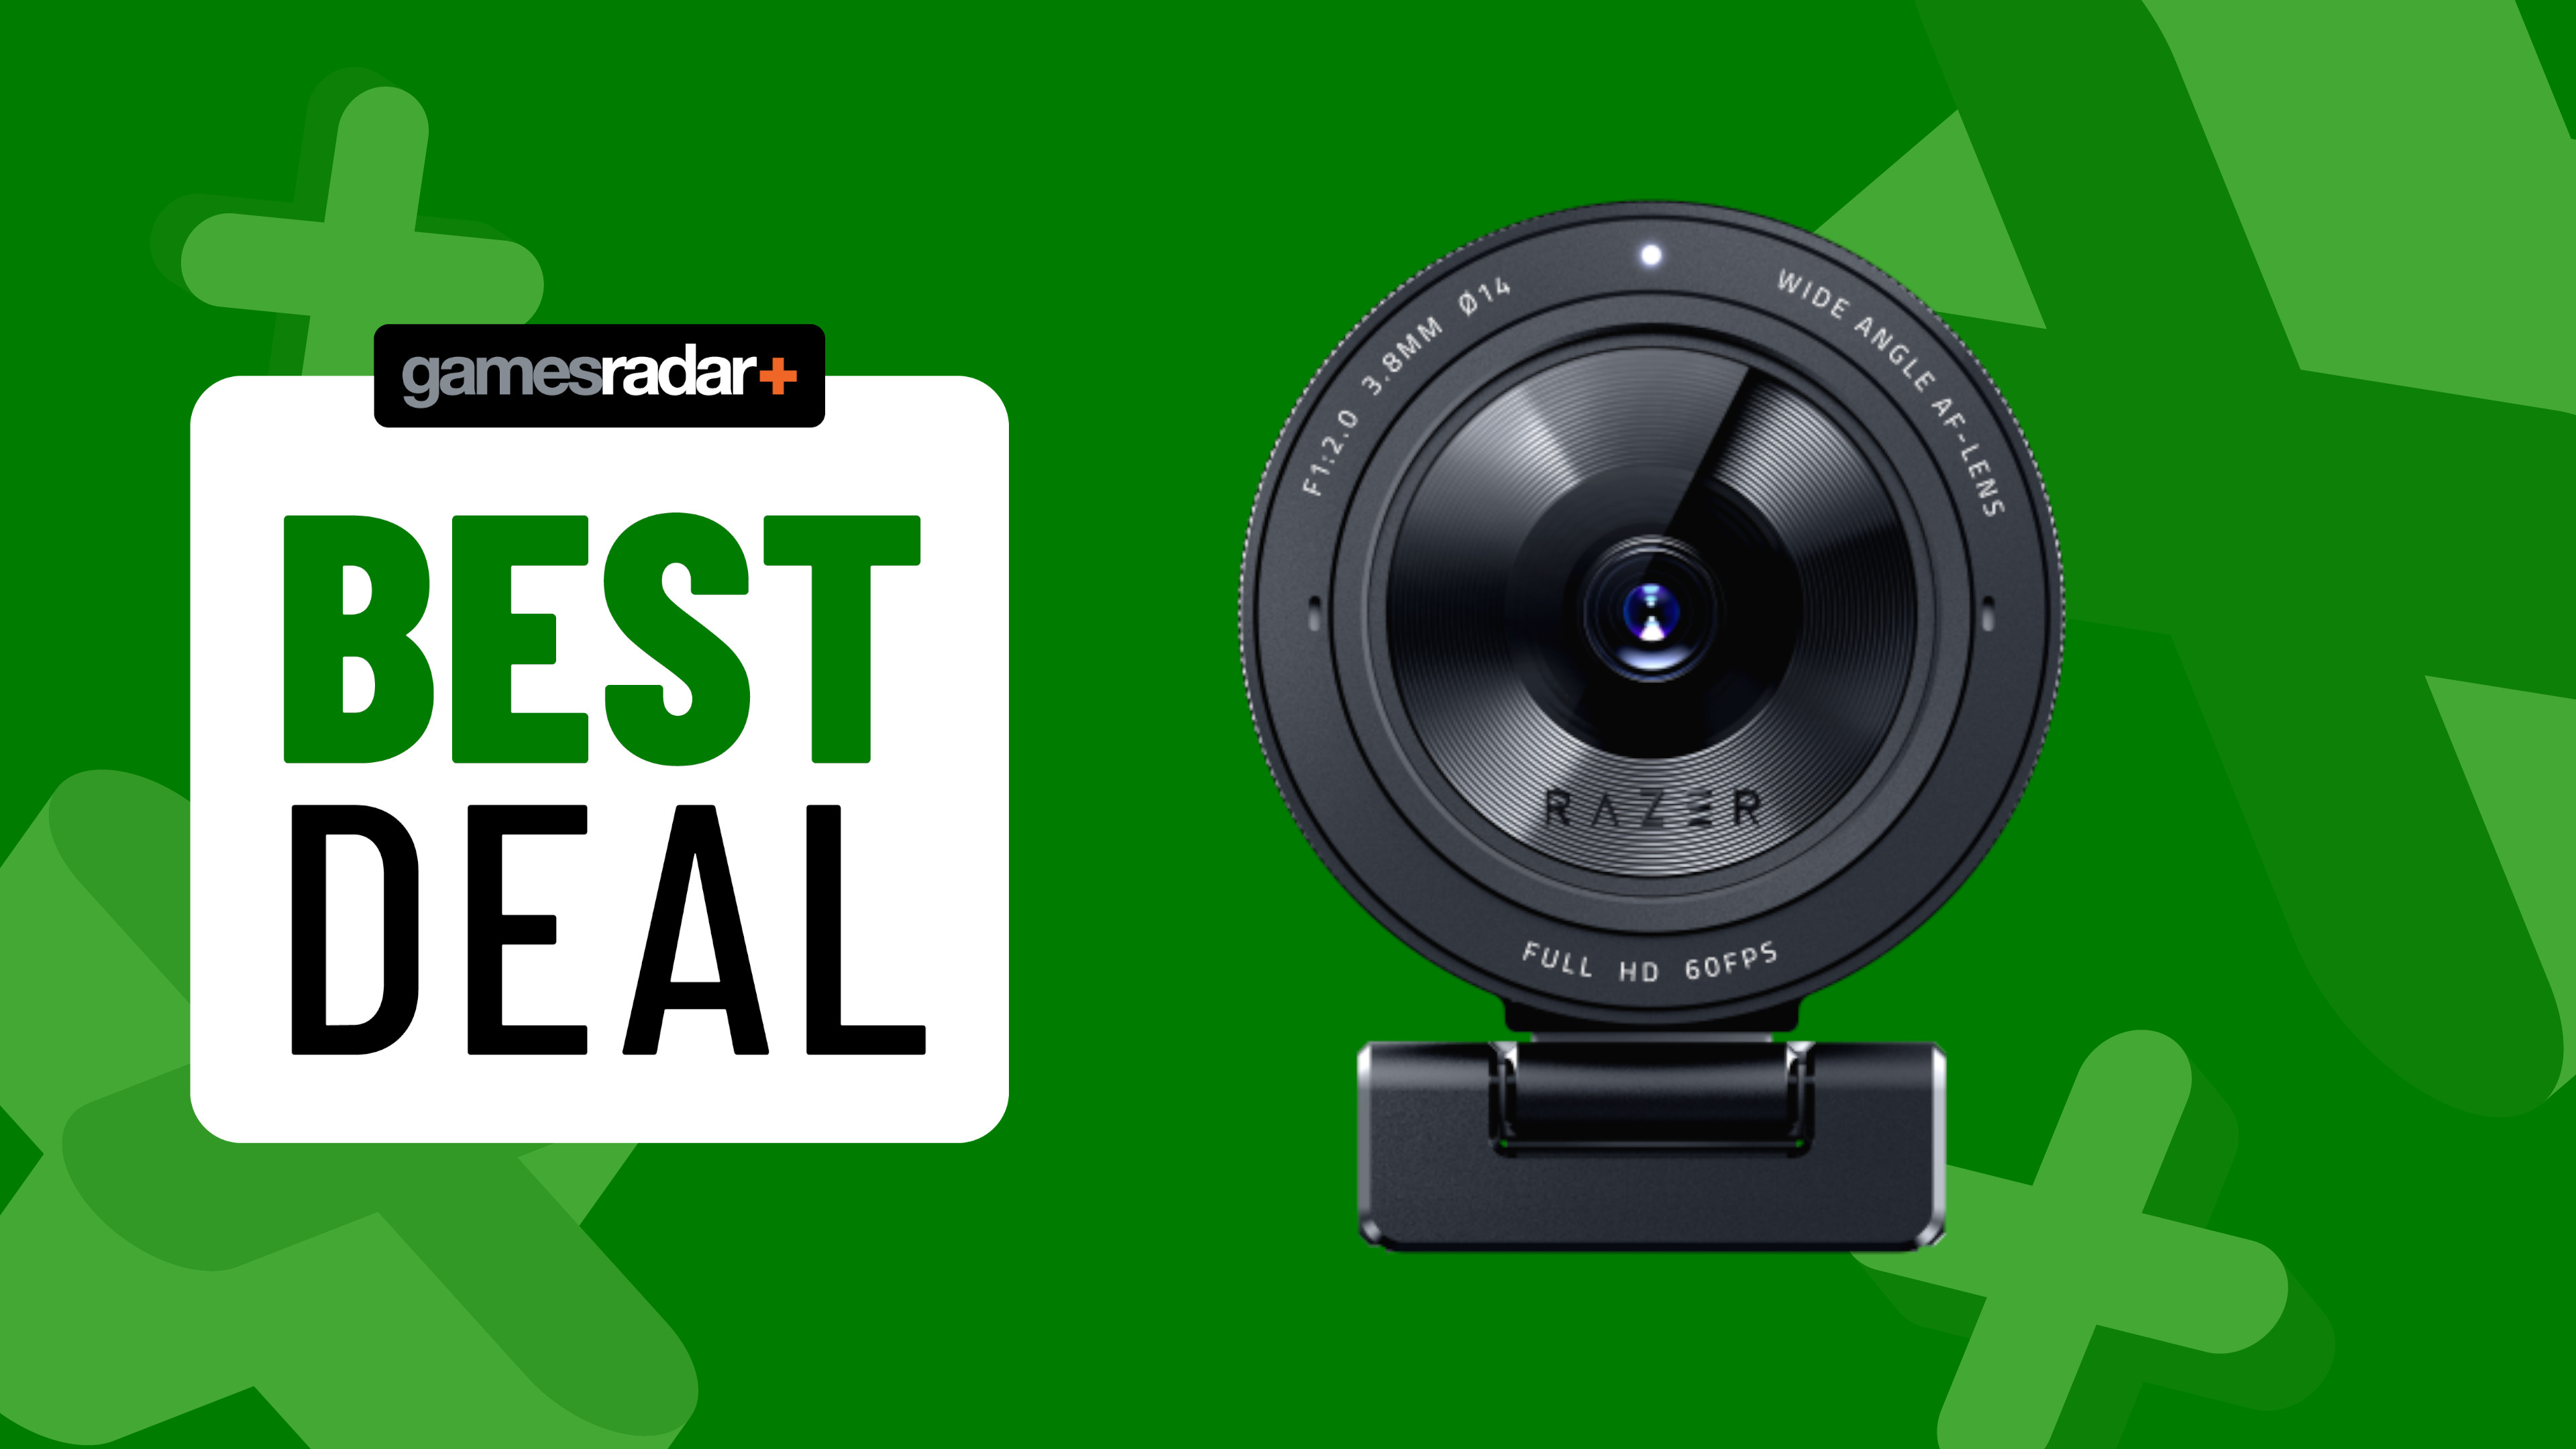 Razer Kiyo Webcam Review: Perfect for Gaming and Streaming